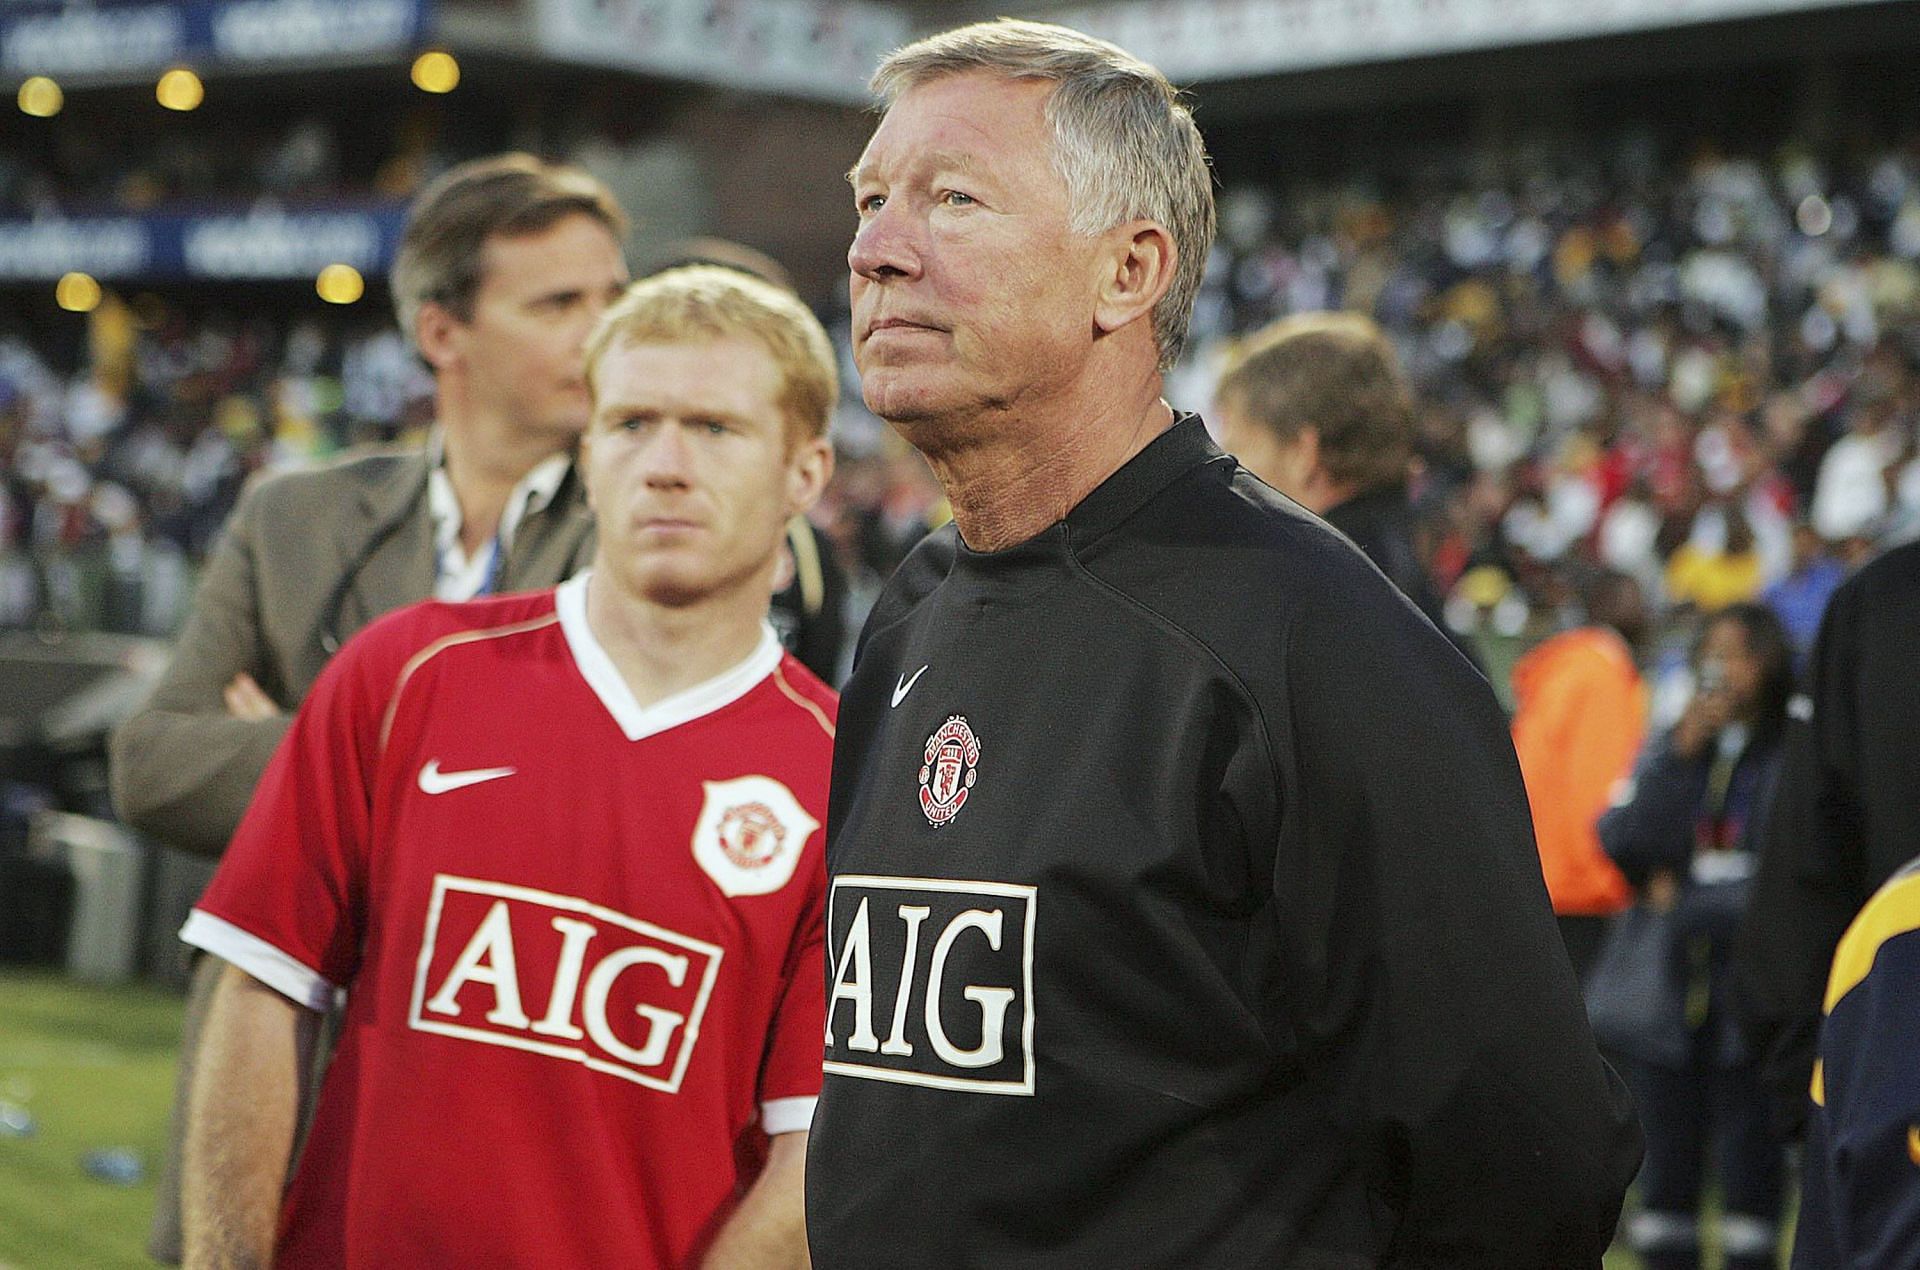 Paul Scholes (left) is one of the best midfielders managed by Sir Alex Ferguson (right).